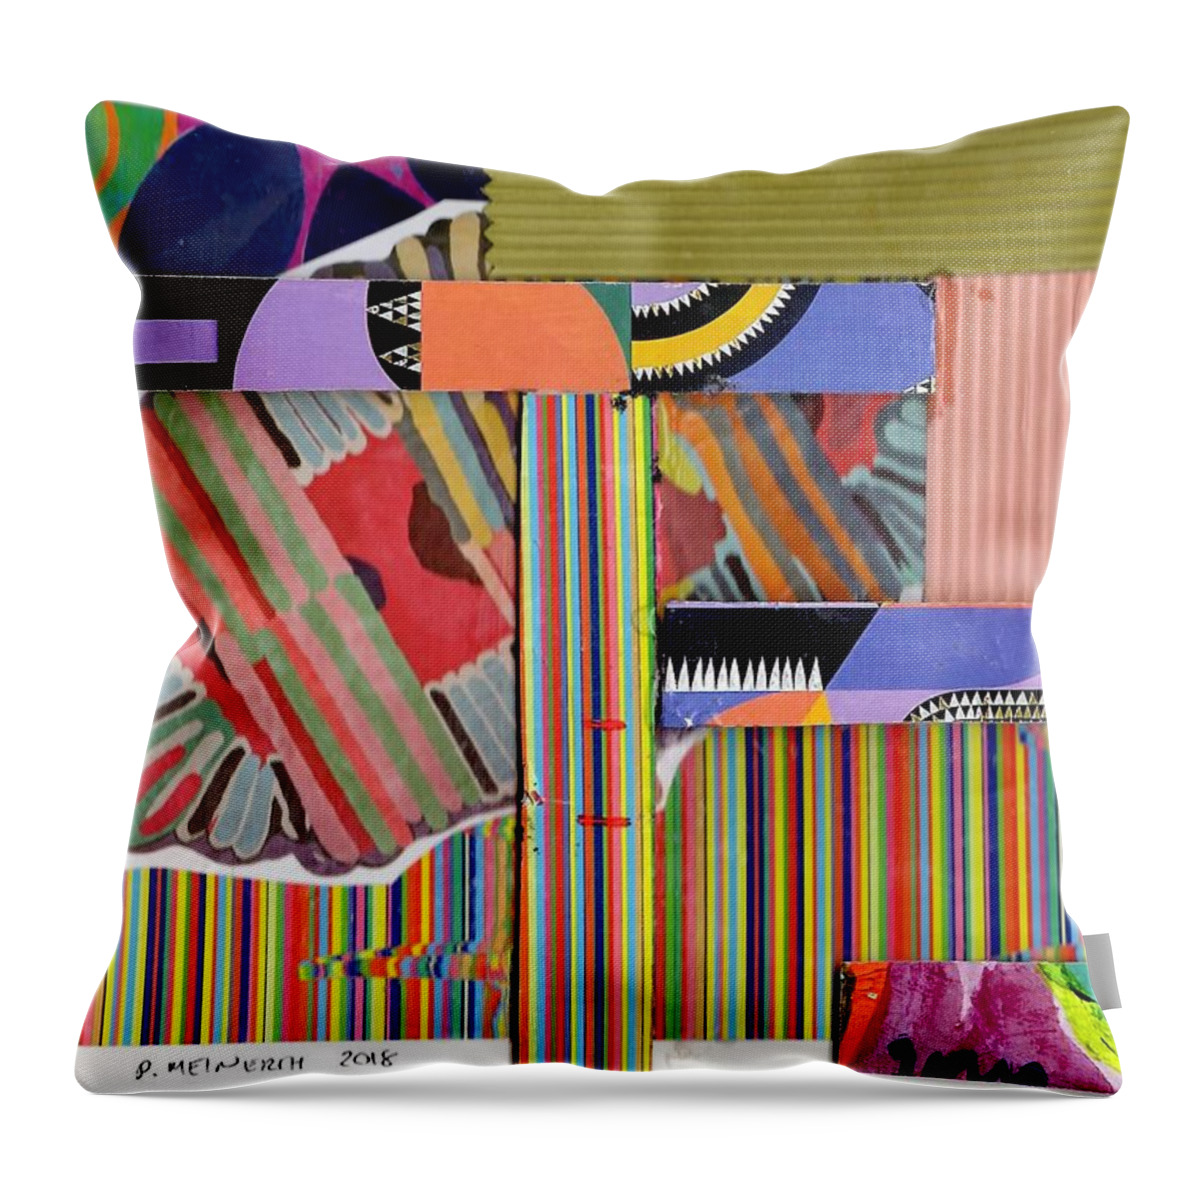 Abstract Art Throw Pillow featuring the drawing Abstract Collage #1 by Paul Meinerth